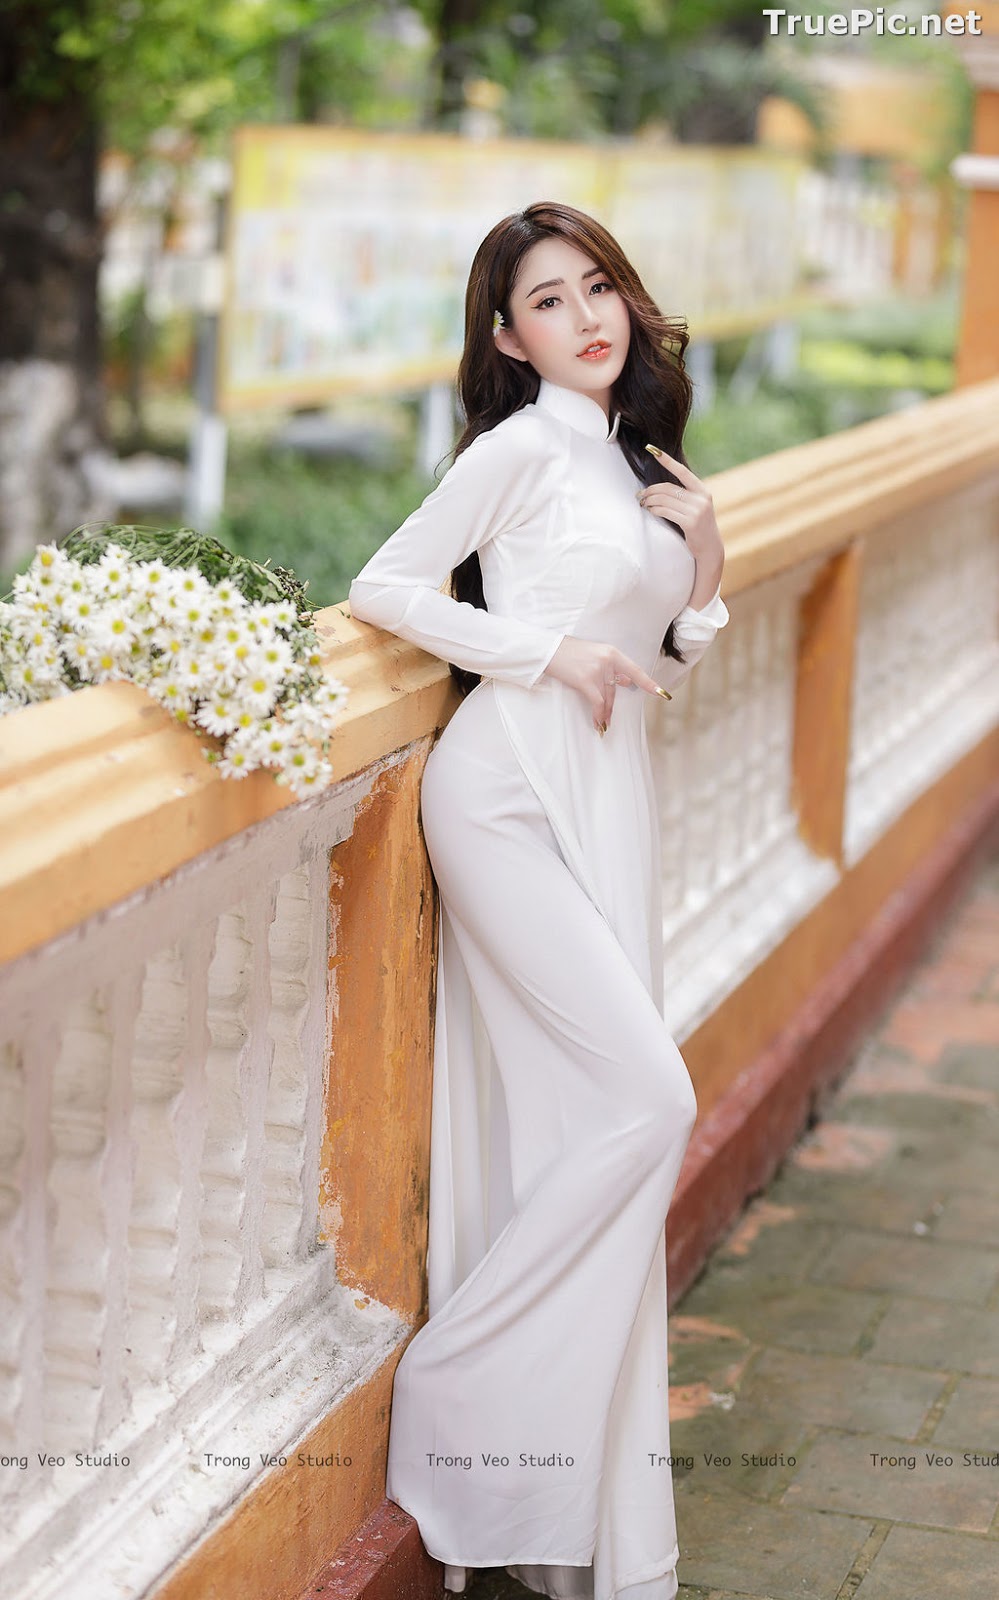 Image The Beauty of Vietnamese Girls with Traditional Dress (Ao Dai) #3 - TruePic.net - Picture-22